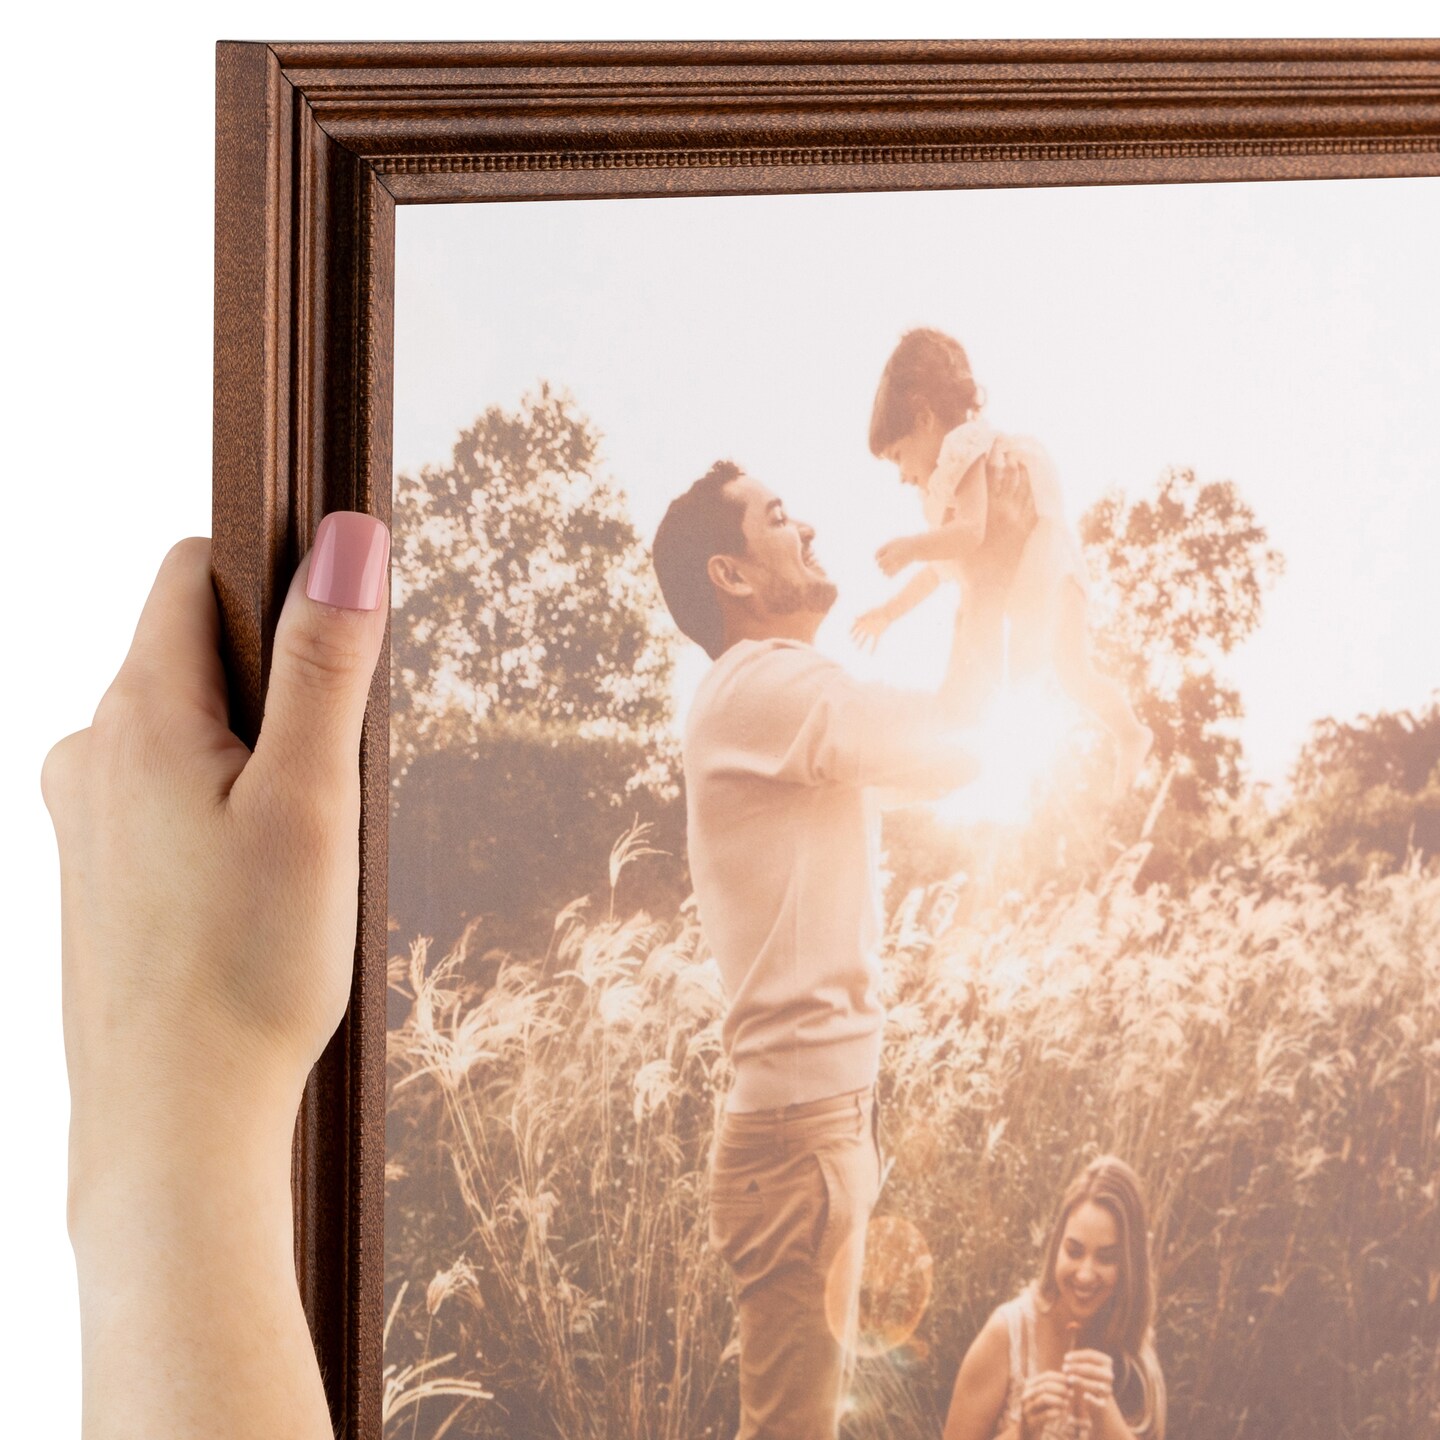 ArtToFrames 12x16 Inch Picture Frame, This 1.25 Inch Custom Wood Poster Frame is Available in Multiple Colors, Great for Your Art or Photos - Comes with Regular Glass and  Foam Backing 3/16 inch (V-81375-12x16)